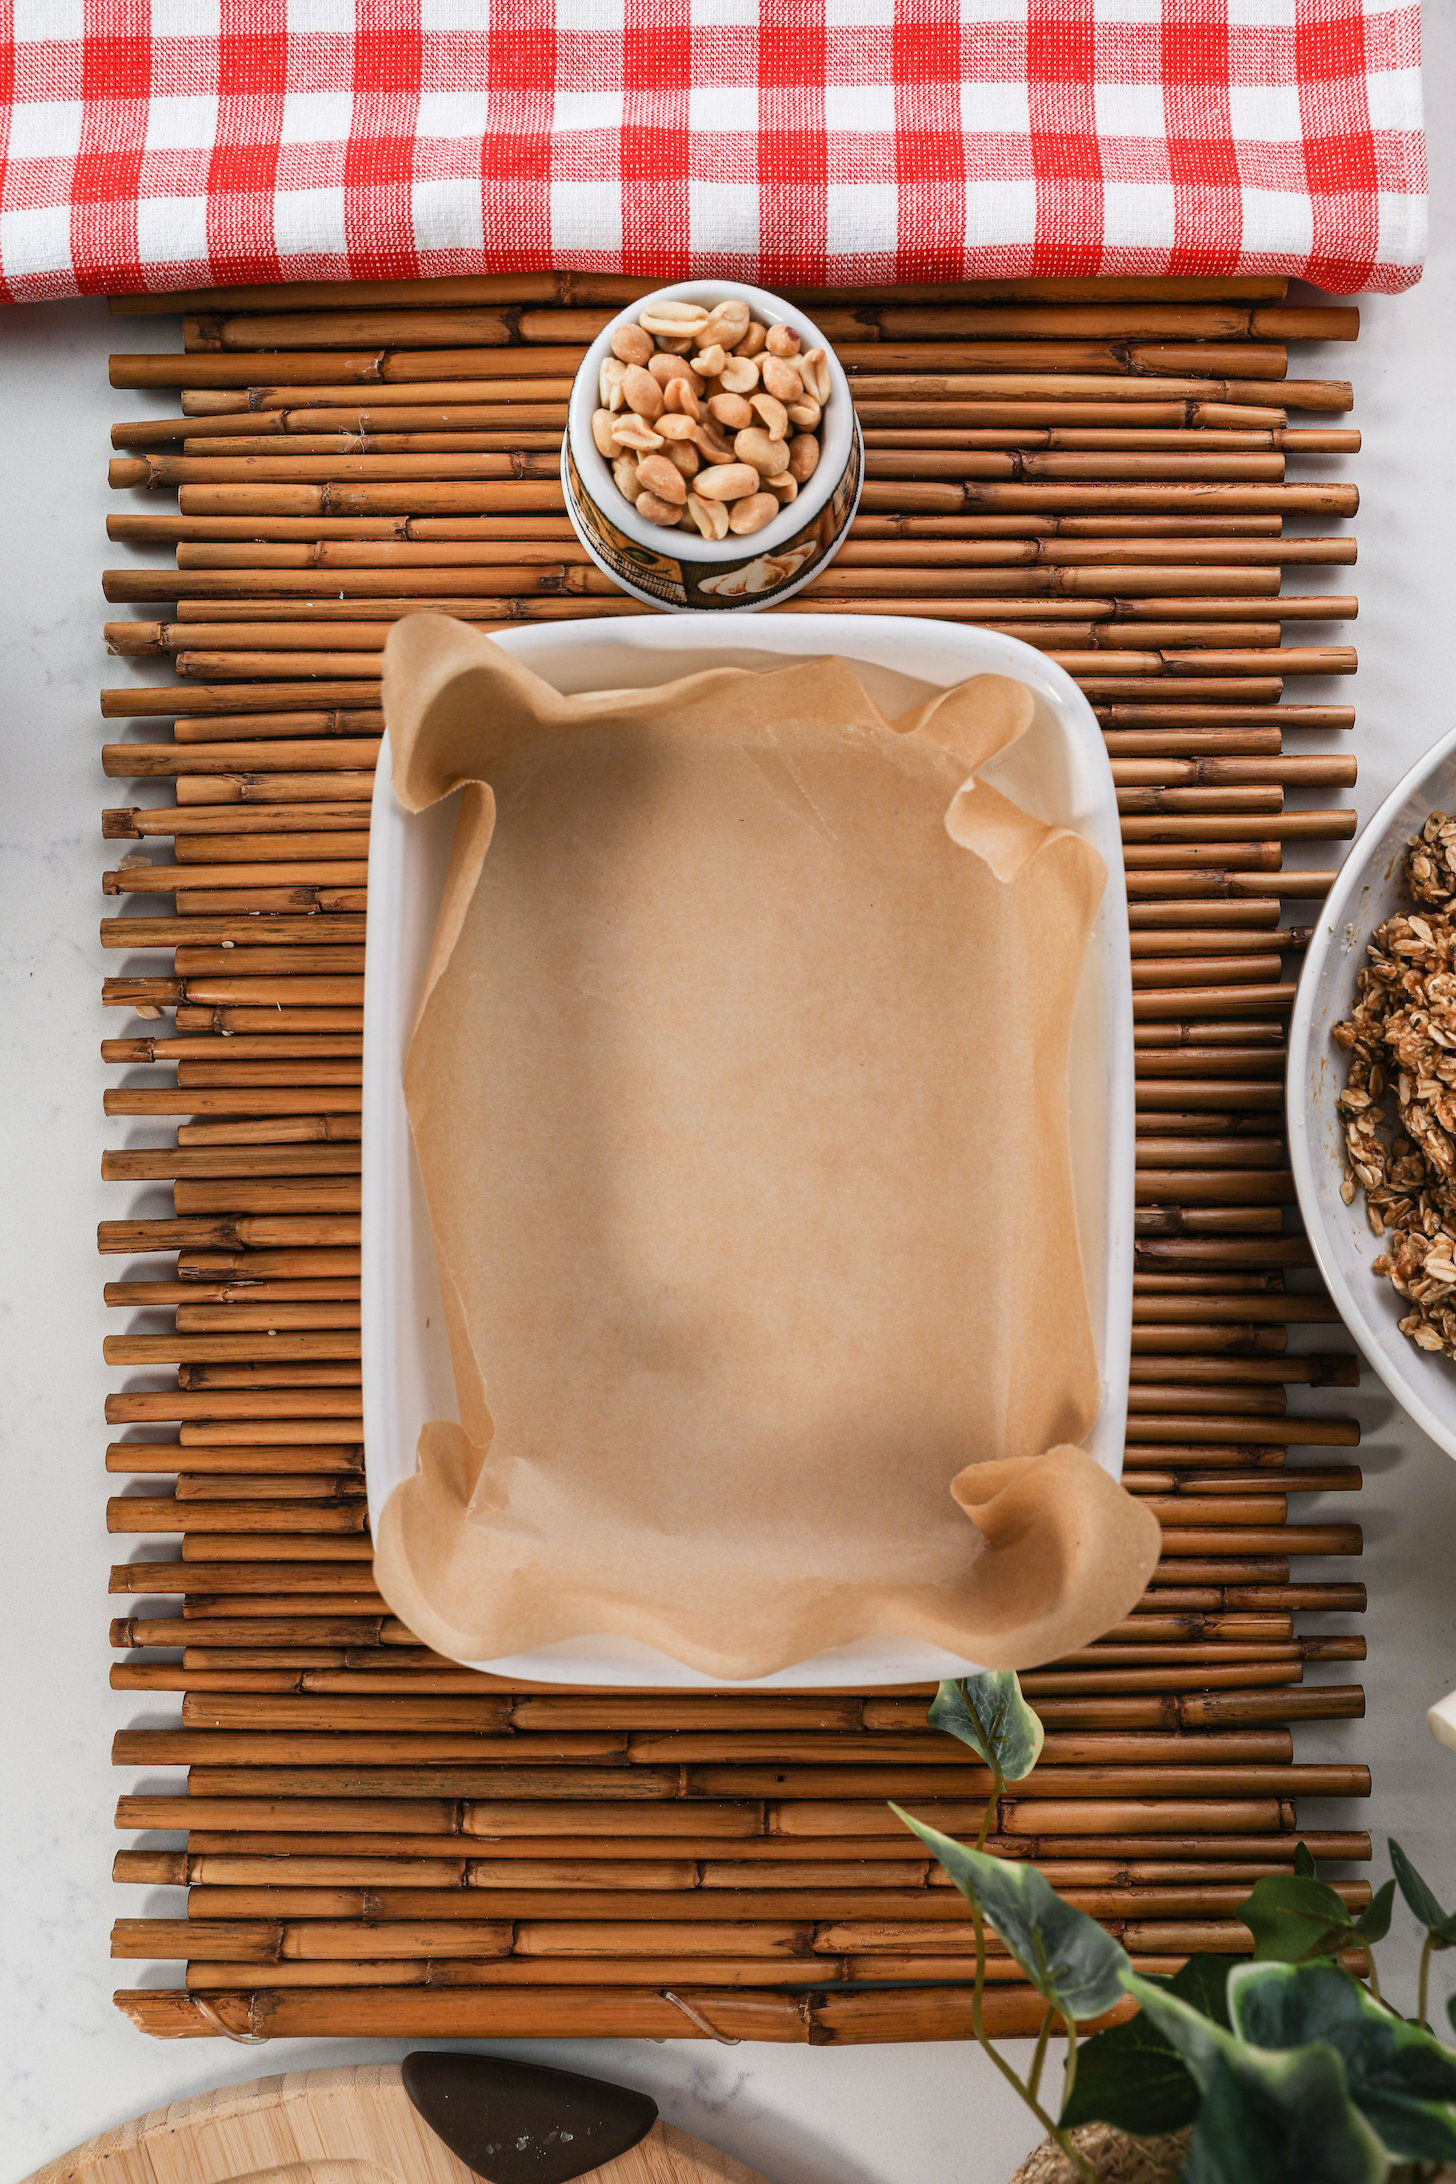 A lined pan on a wooden mat with peanuts on the side.